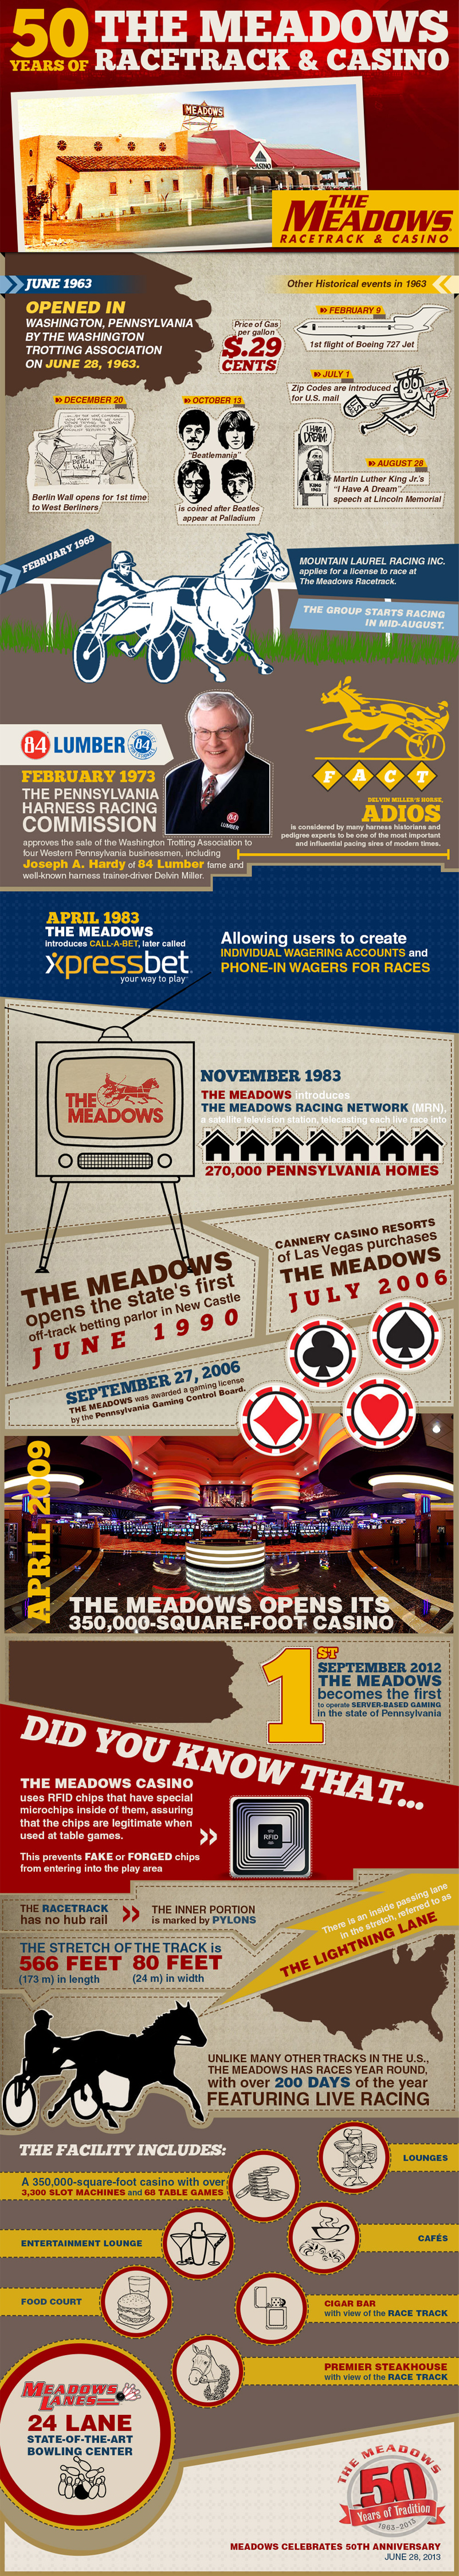 50 Years of the Meadows Racetrack & Casino